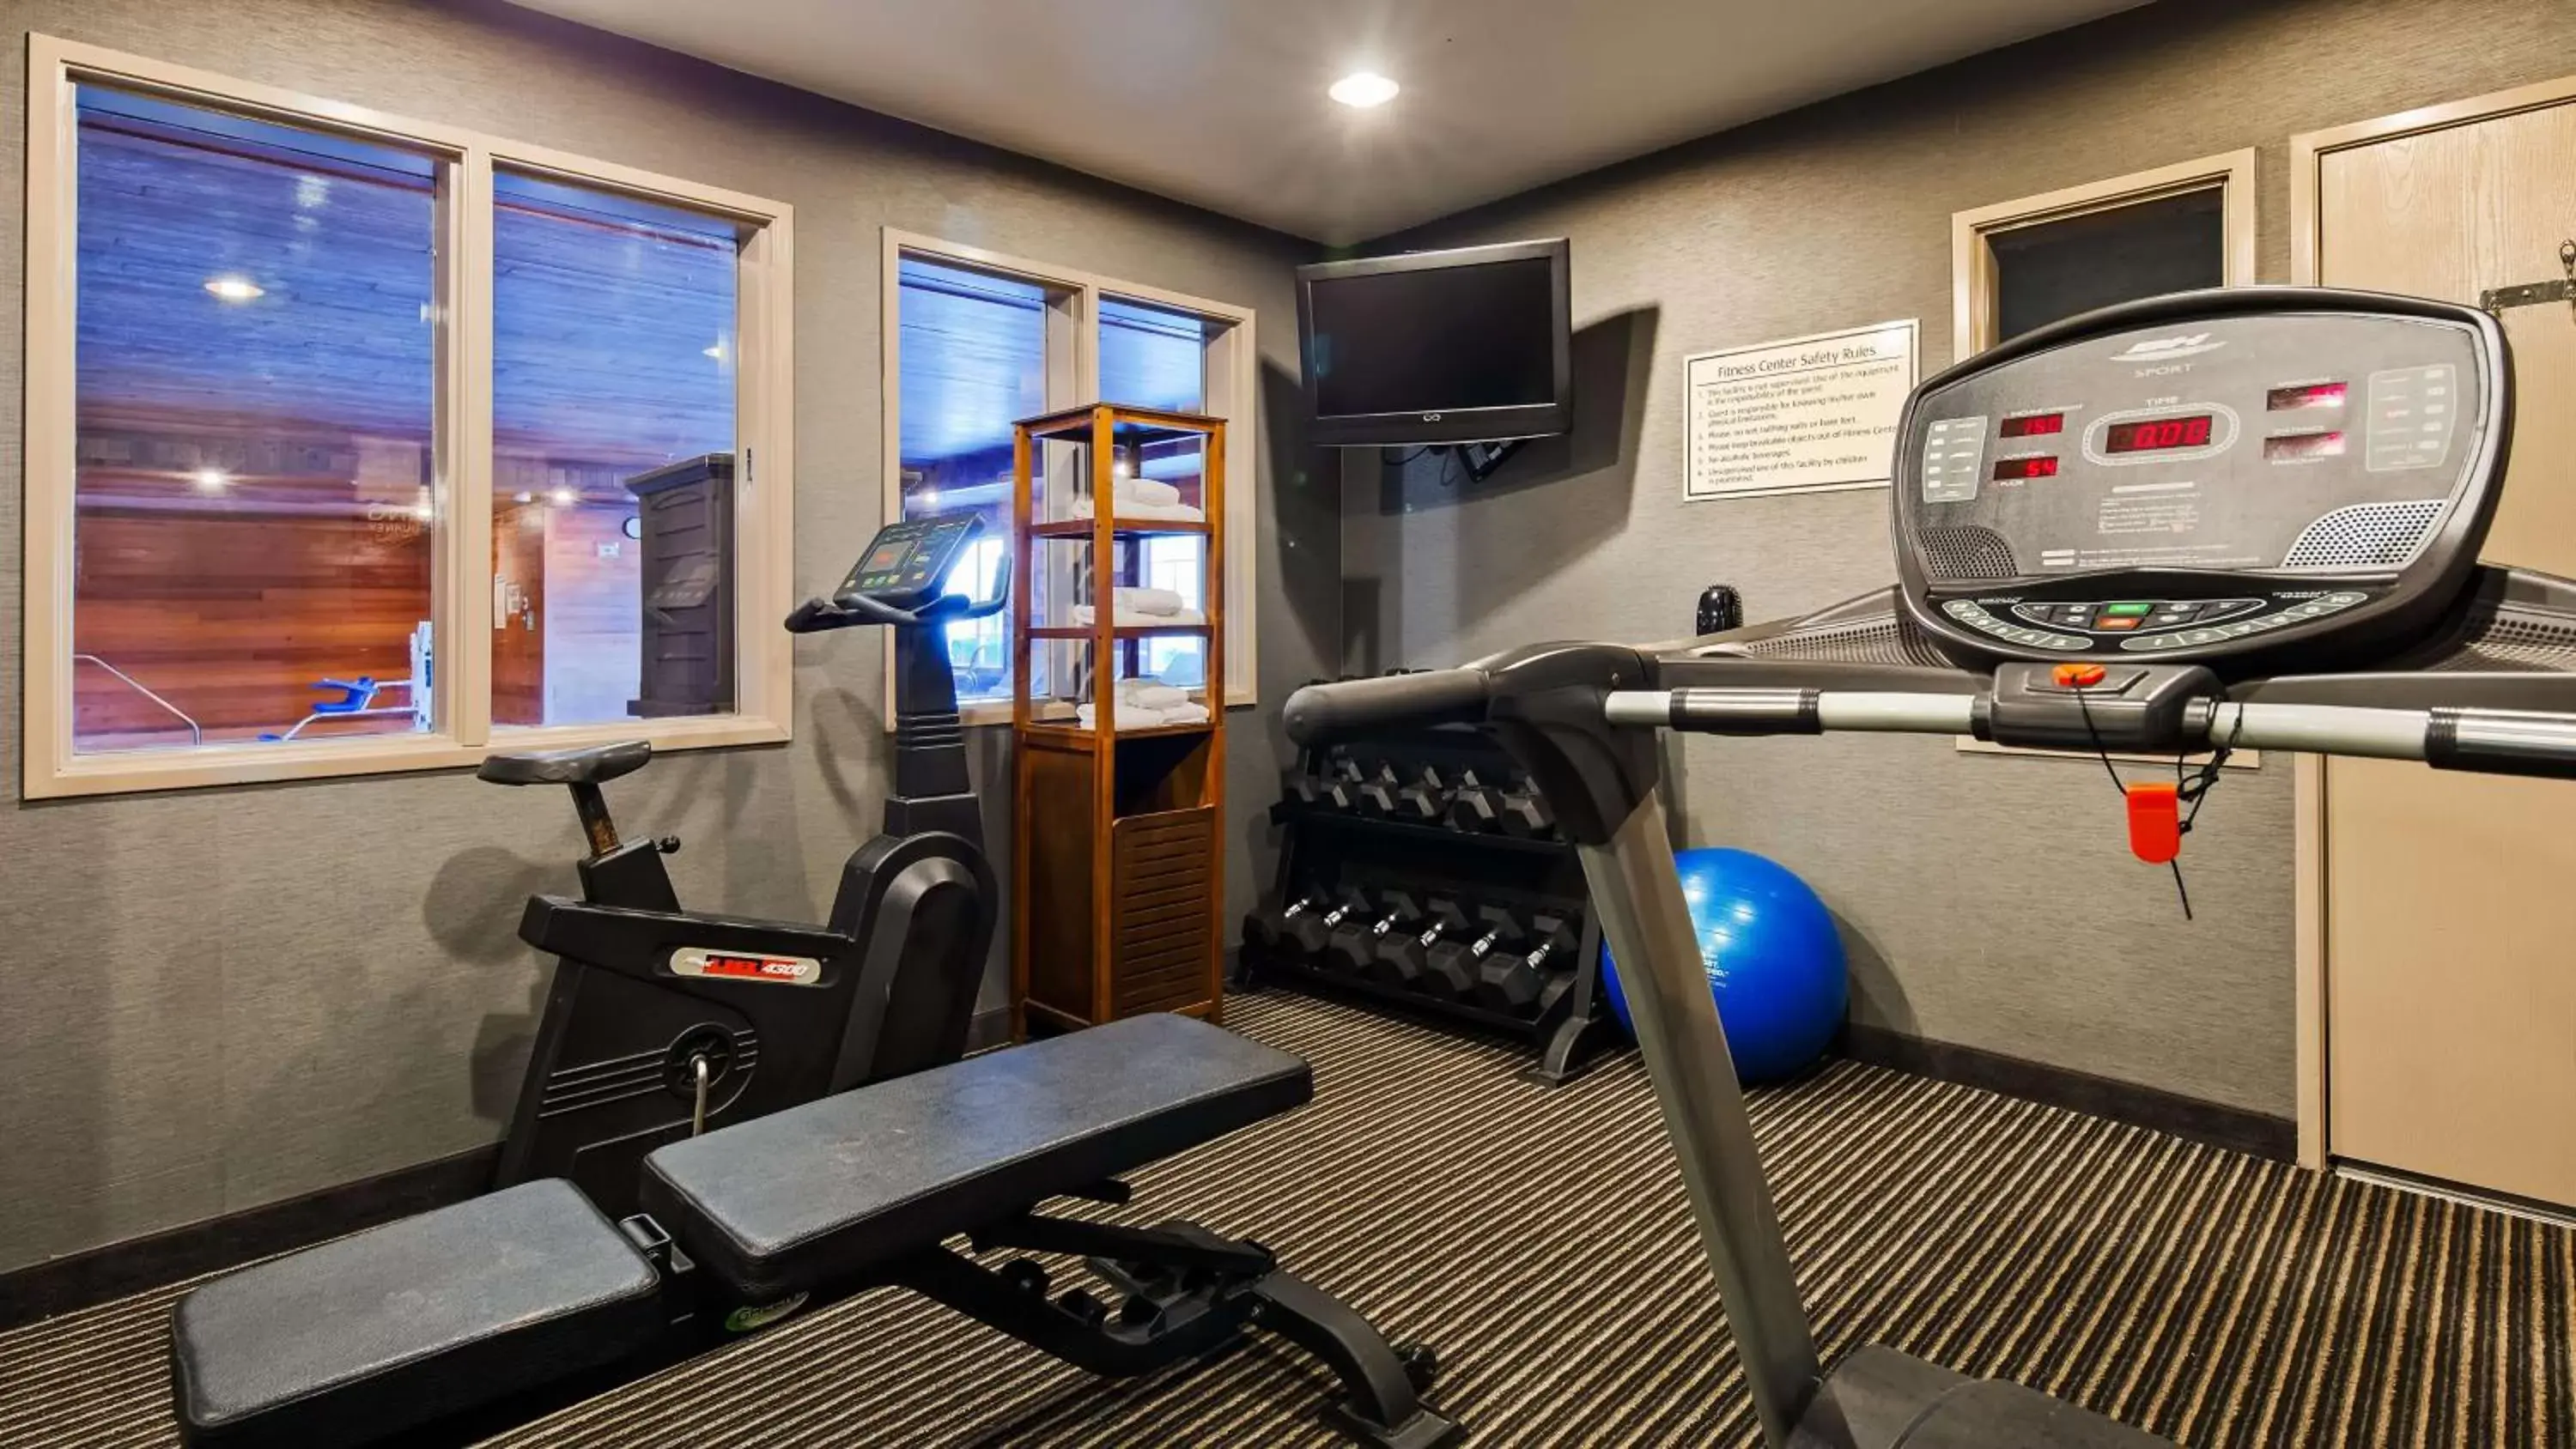 Fitness centre/facilities, Fitness Center/Facilities in Best Western Plus Rama Inn & Suites